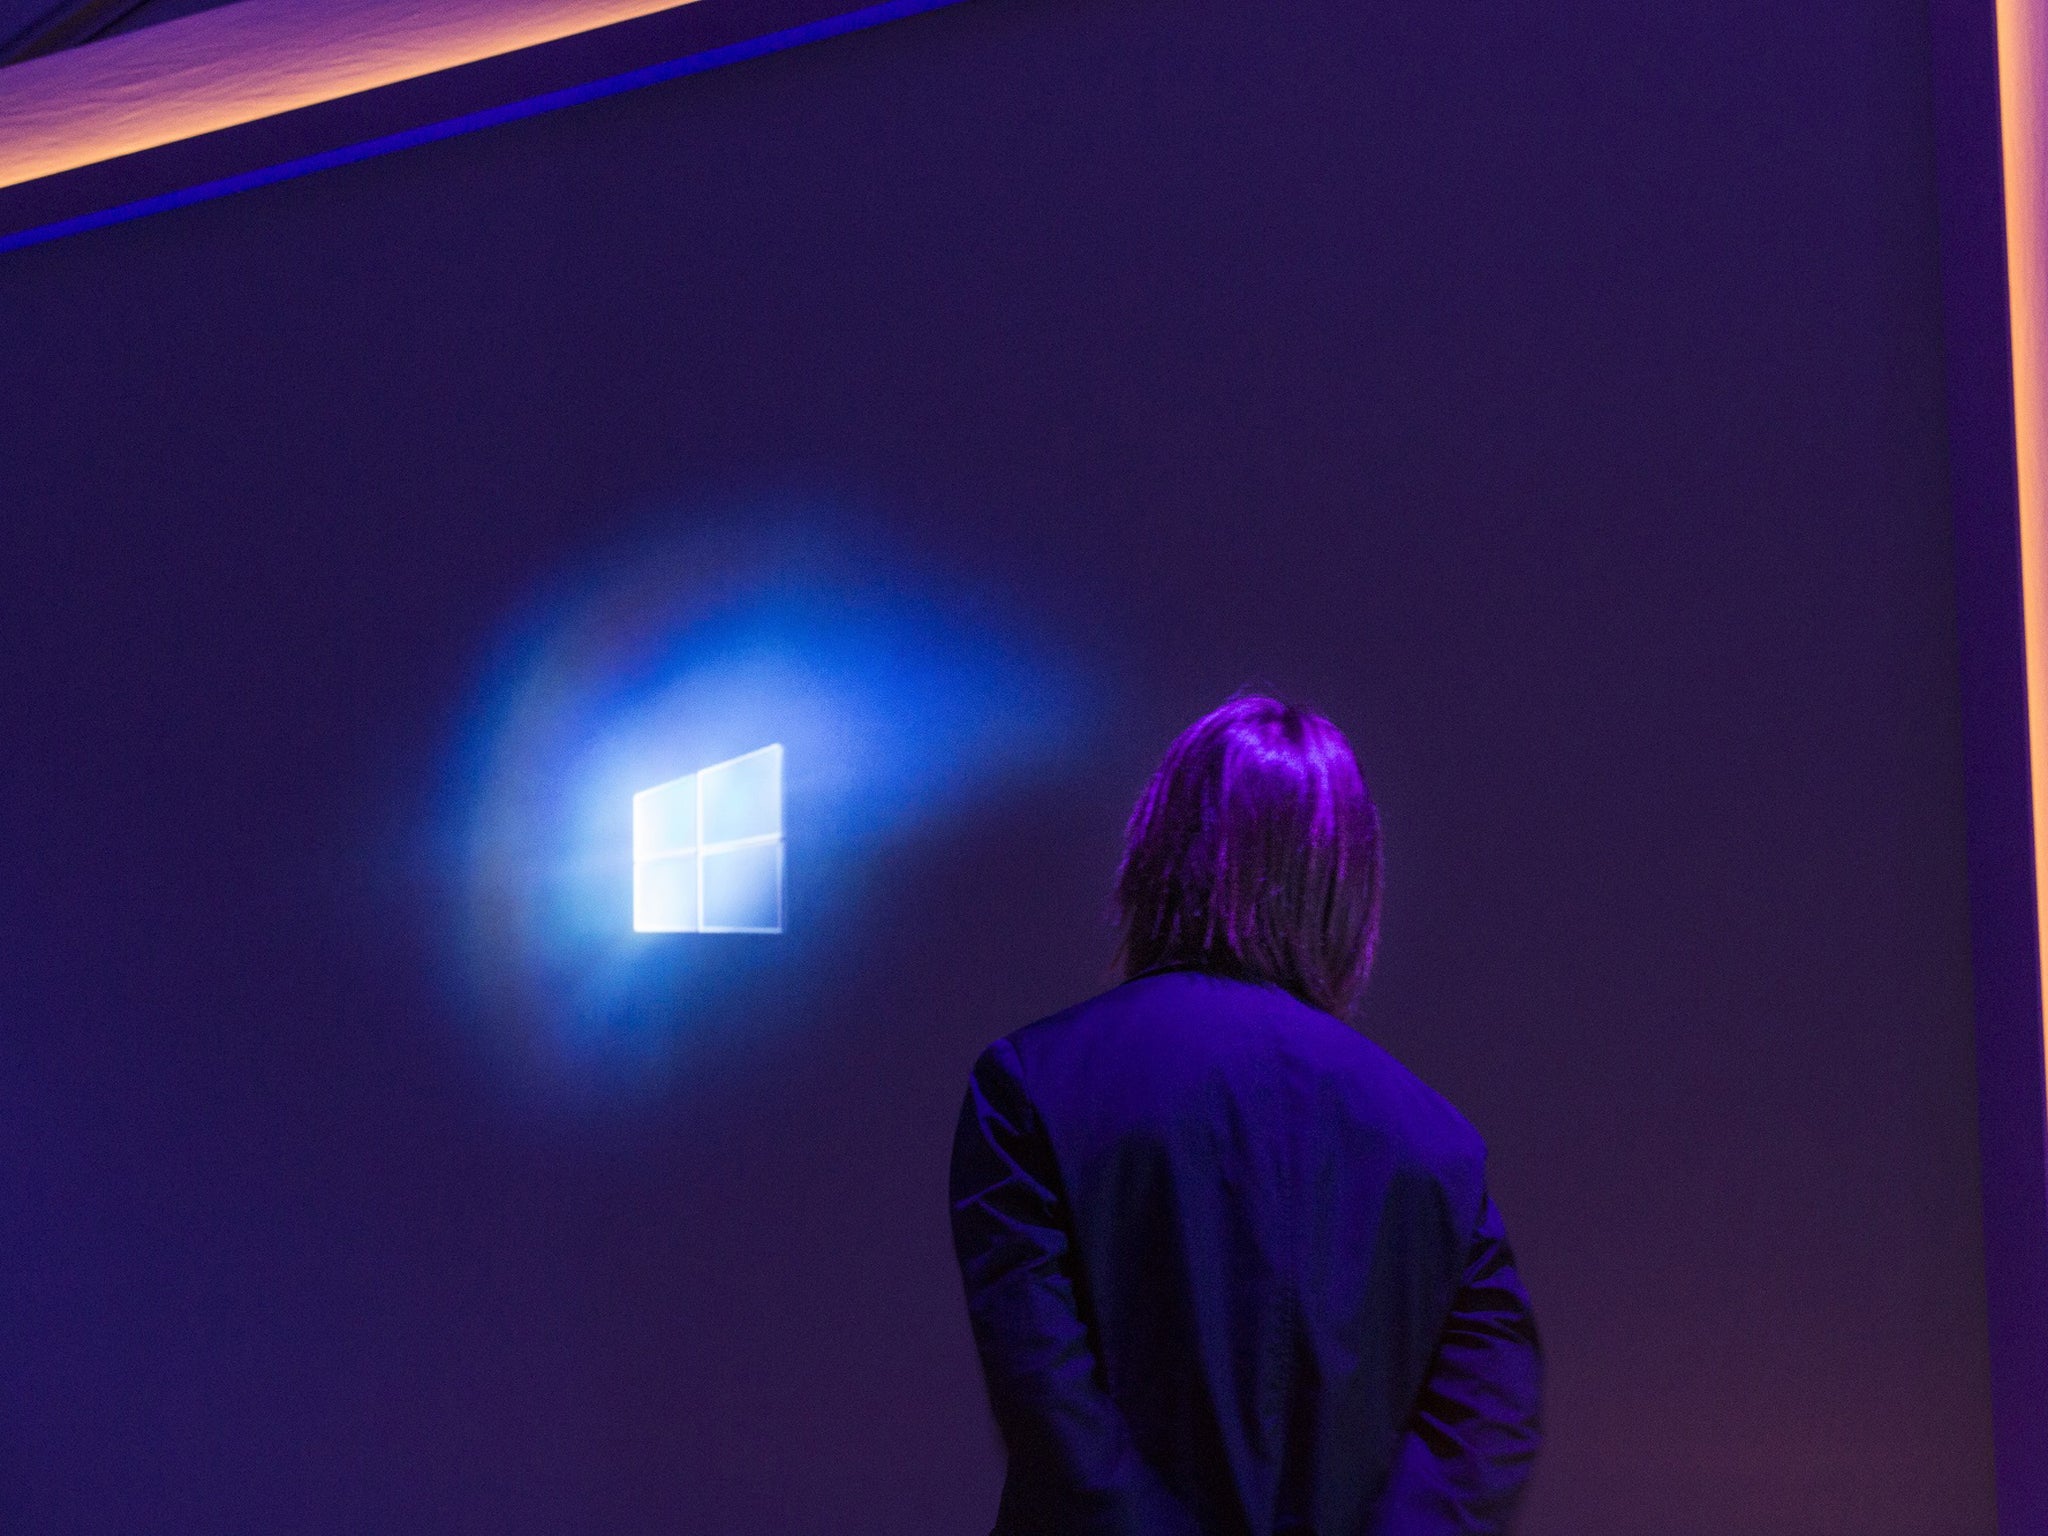 Alex Kipman, who led the invention of Microsoft's hologram headset, at the Windows 10 launch